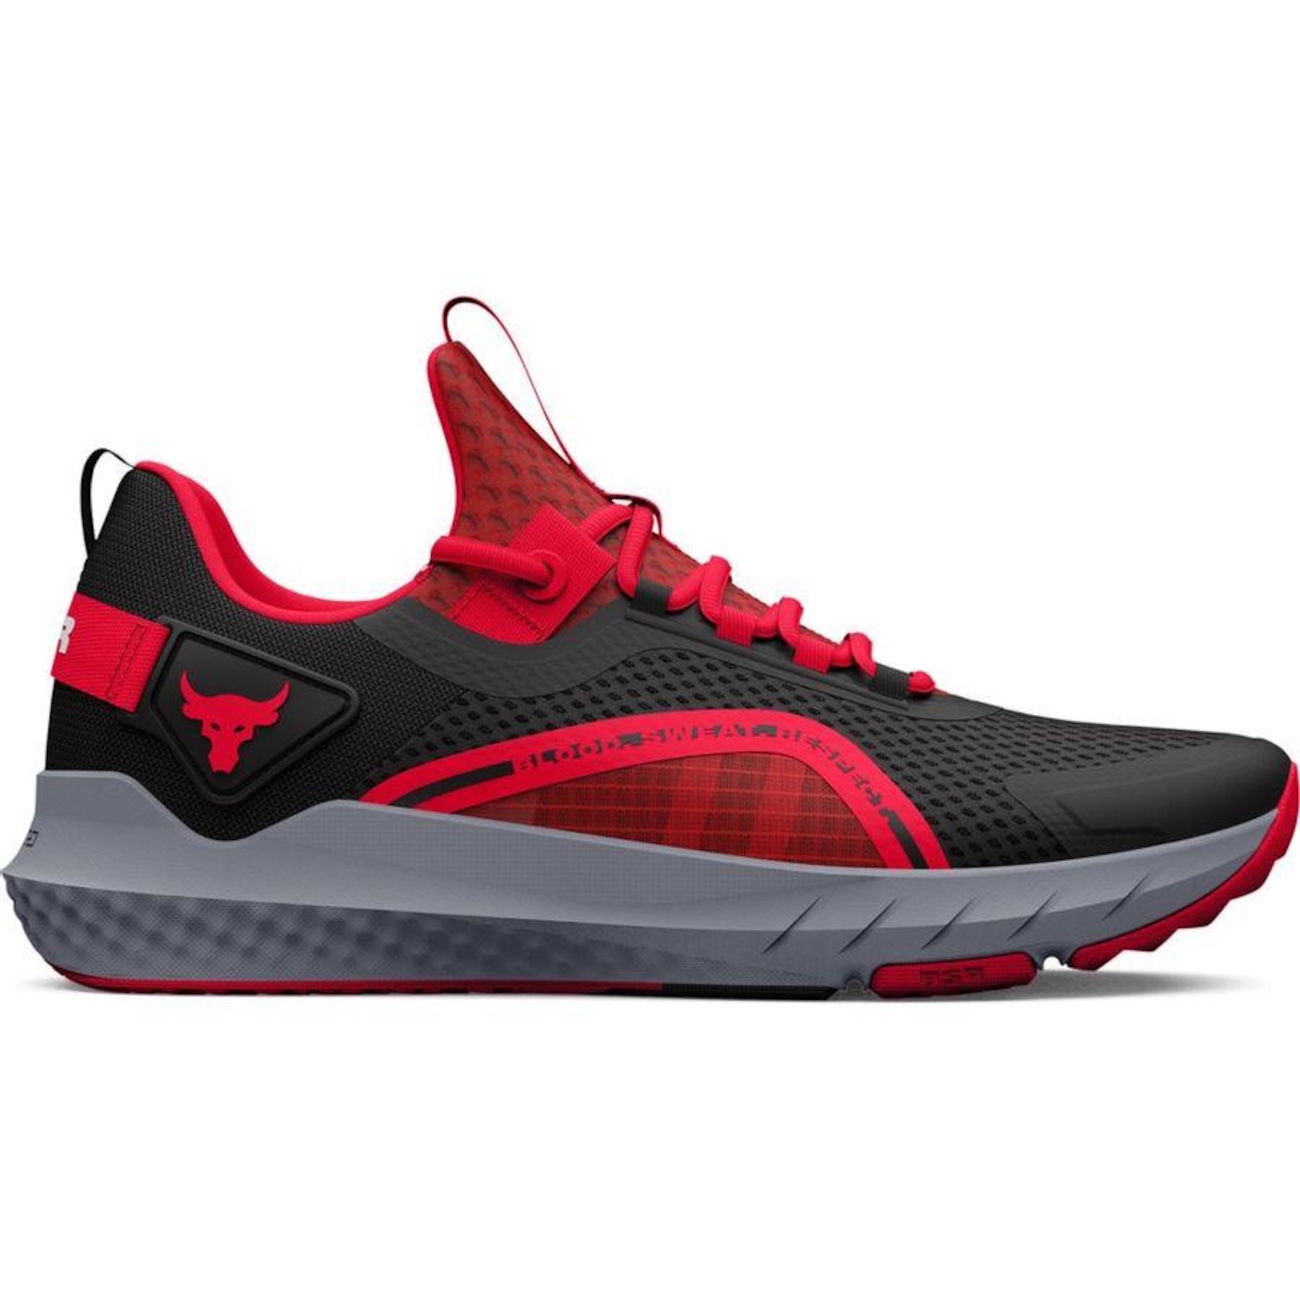 Tênis Under Armour Project Rock BSR 3 - Masculino